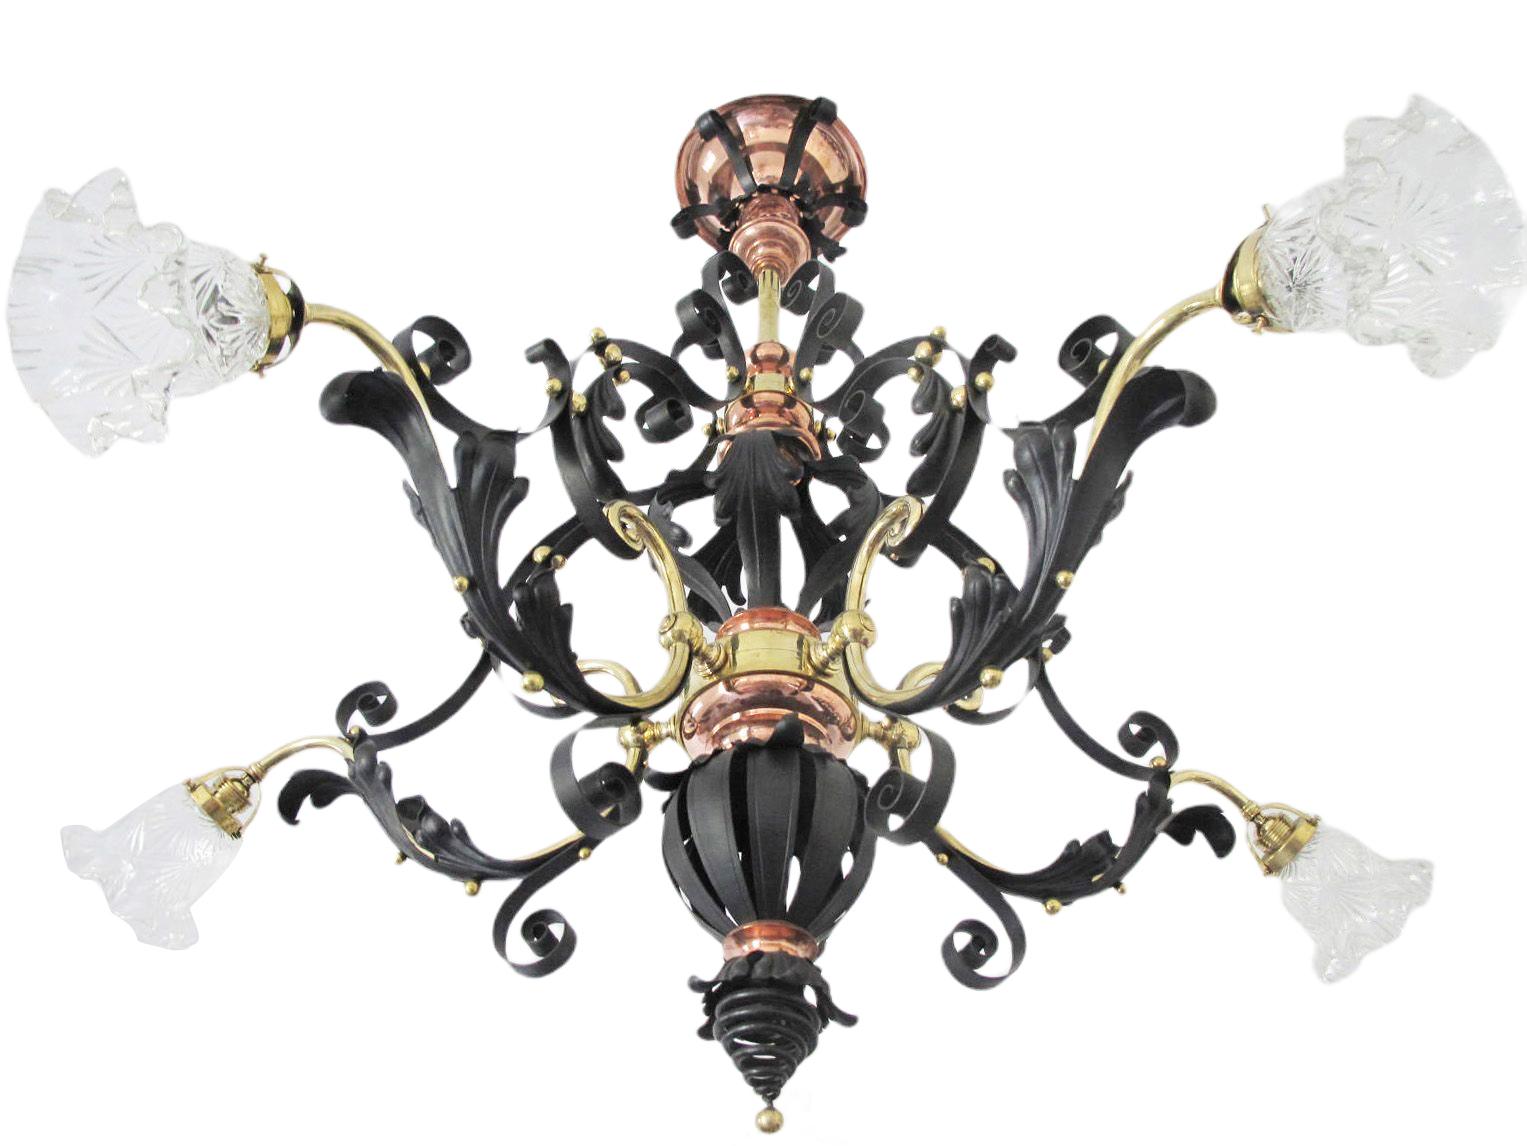 Get a chandelier at home, dominated by geometric shapes typical of Art Nouveau - flowers, ornaments and other shapes. The chandelier has 5 arms and rich decoration in the form of beautifully elaborated decoration. All parts, including lampshades,